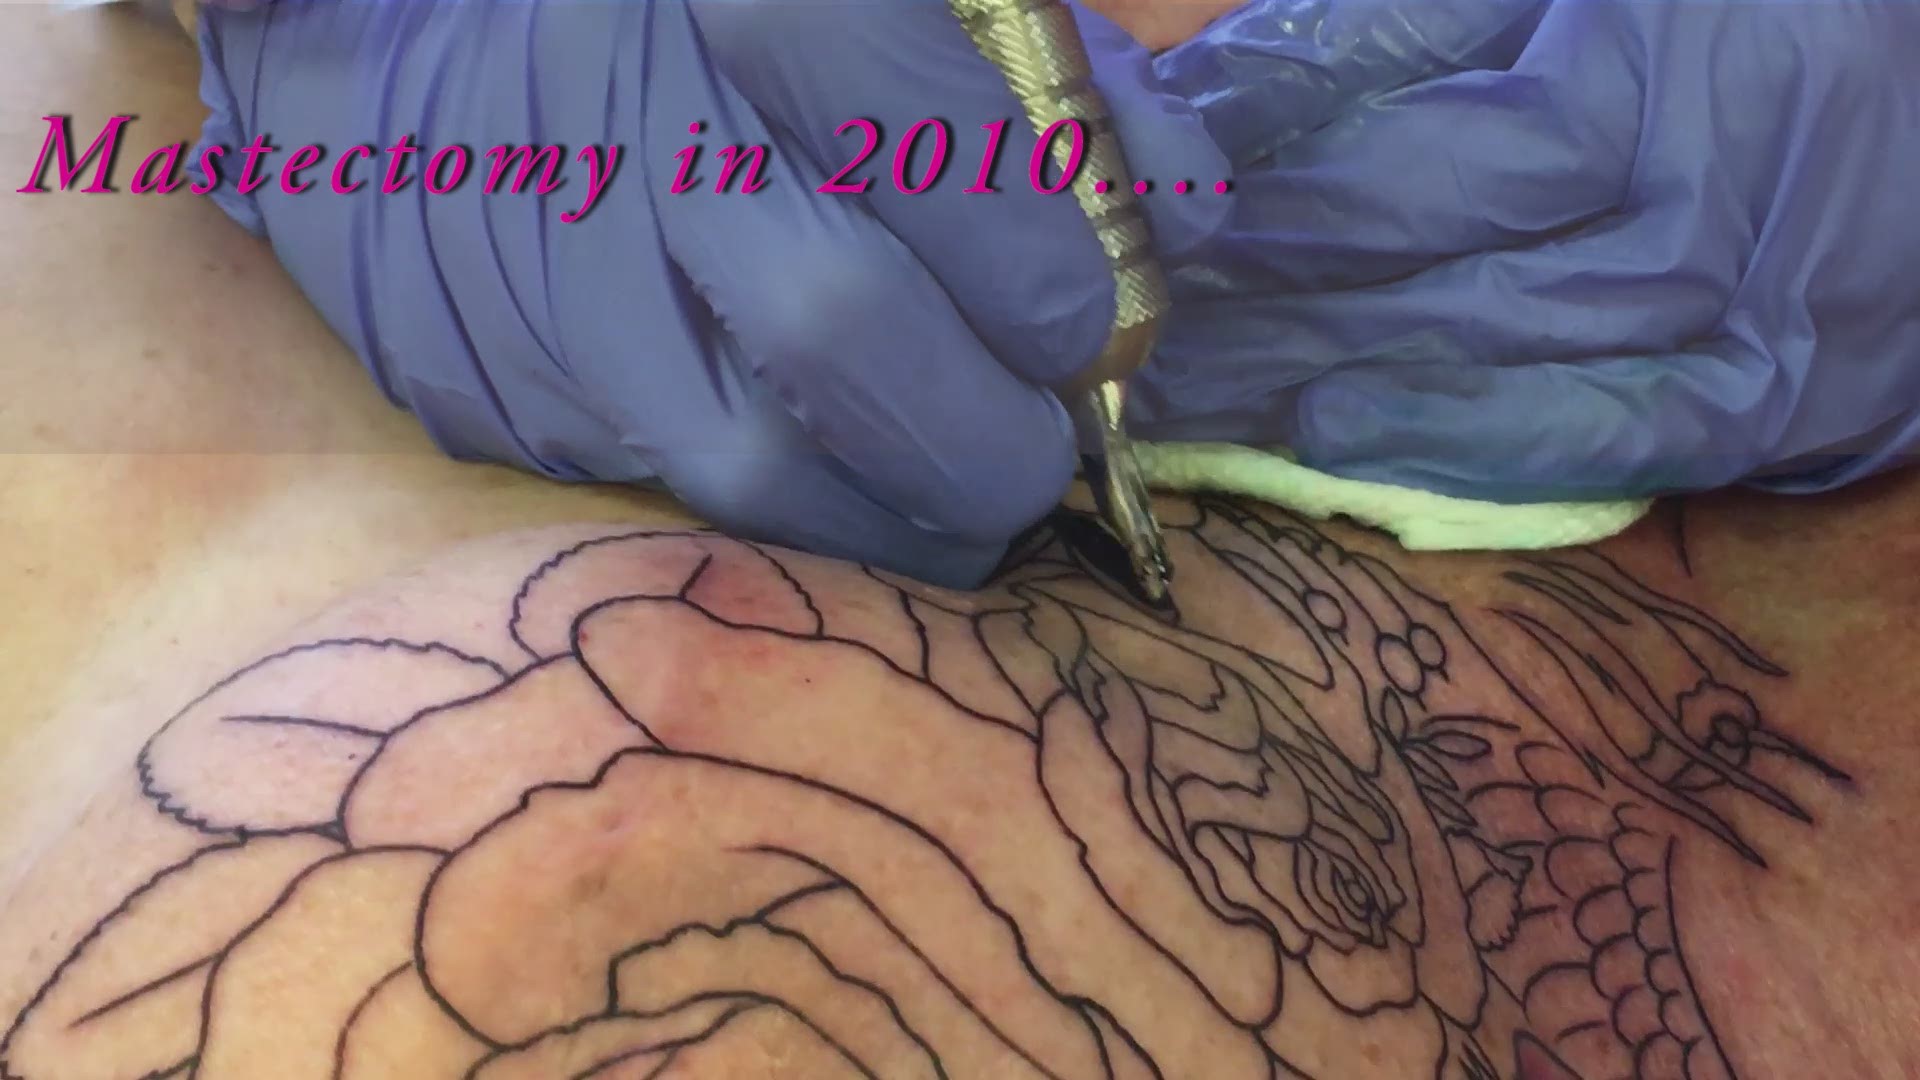 Breast cancer survivors get special tattoos to cover mastectomy scars